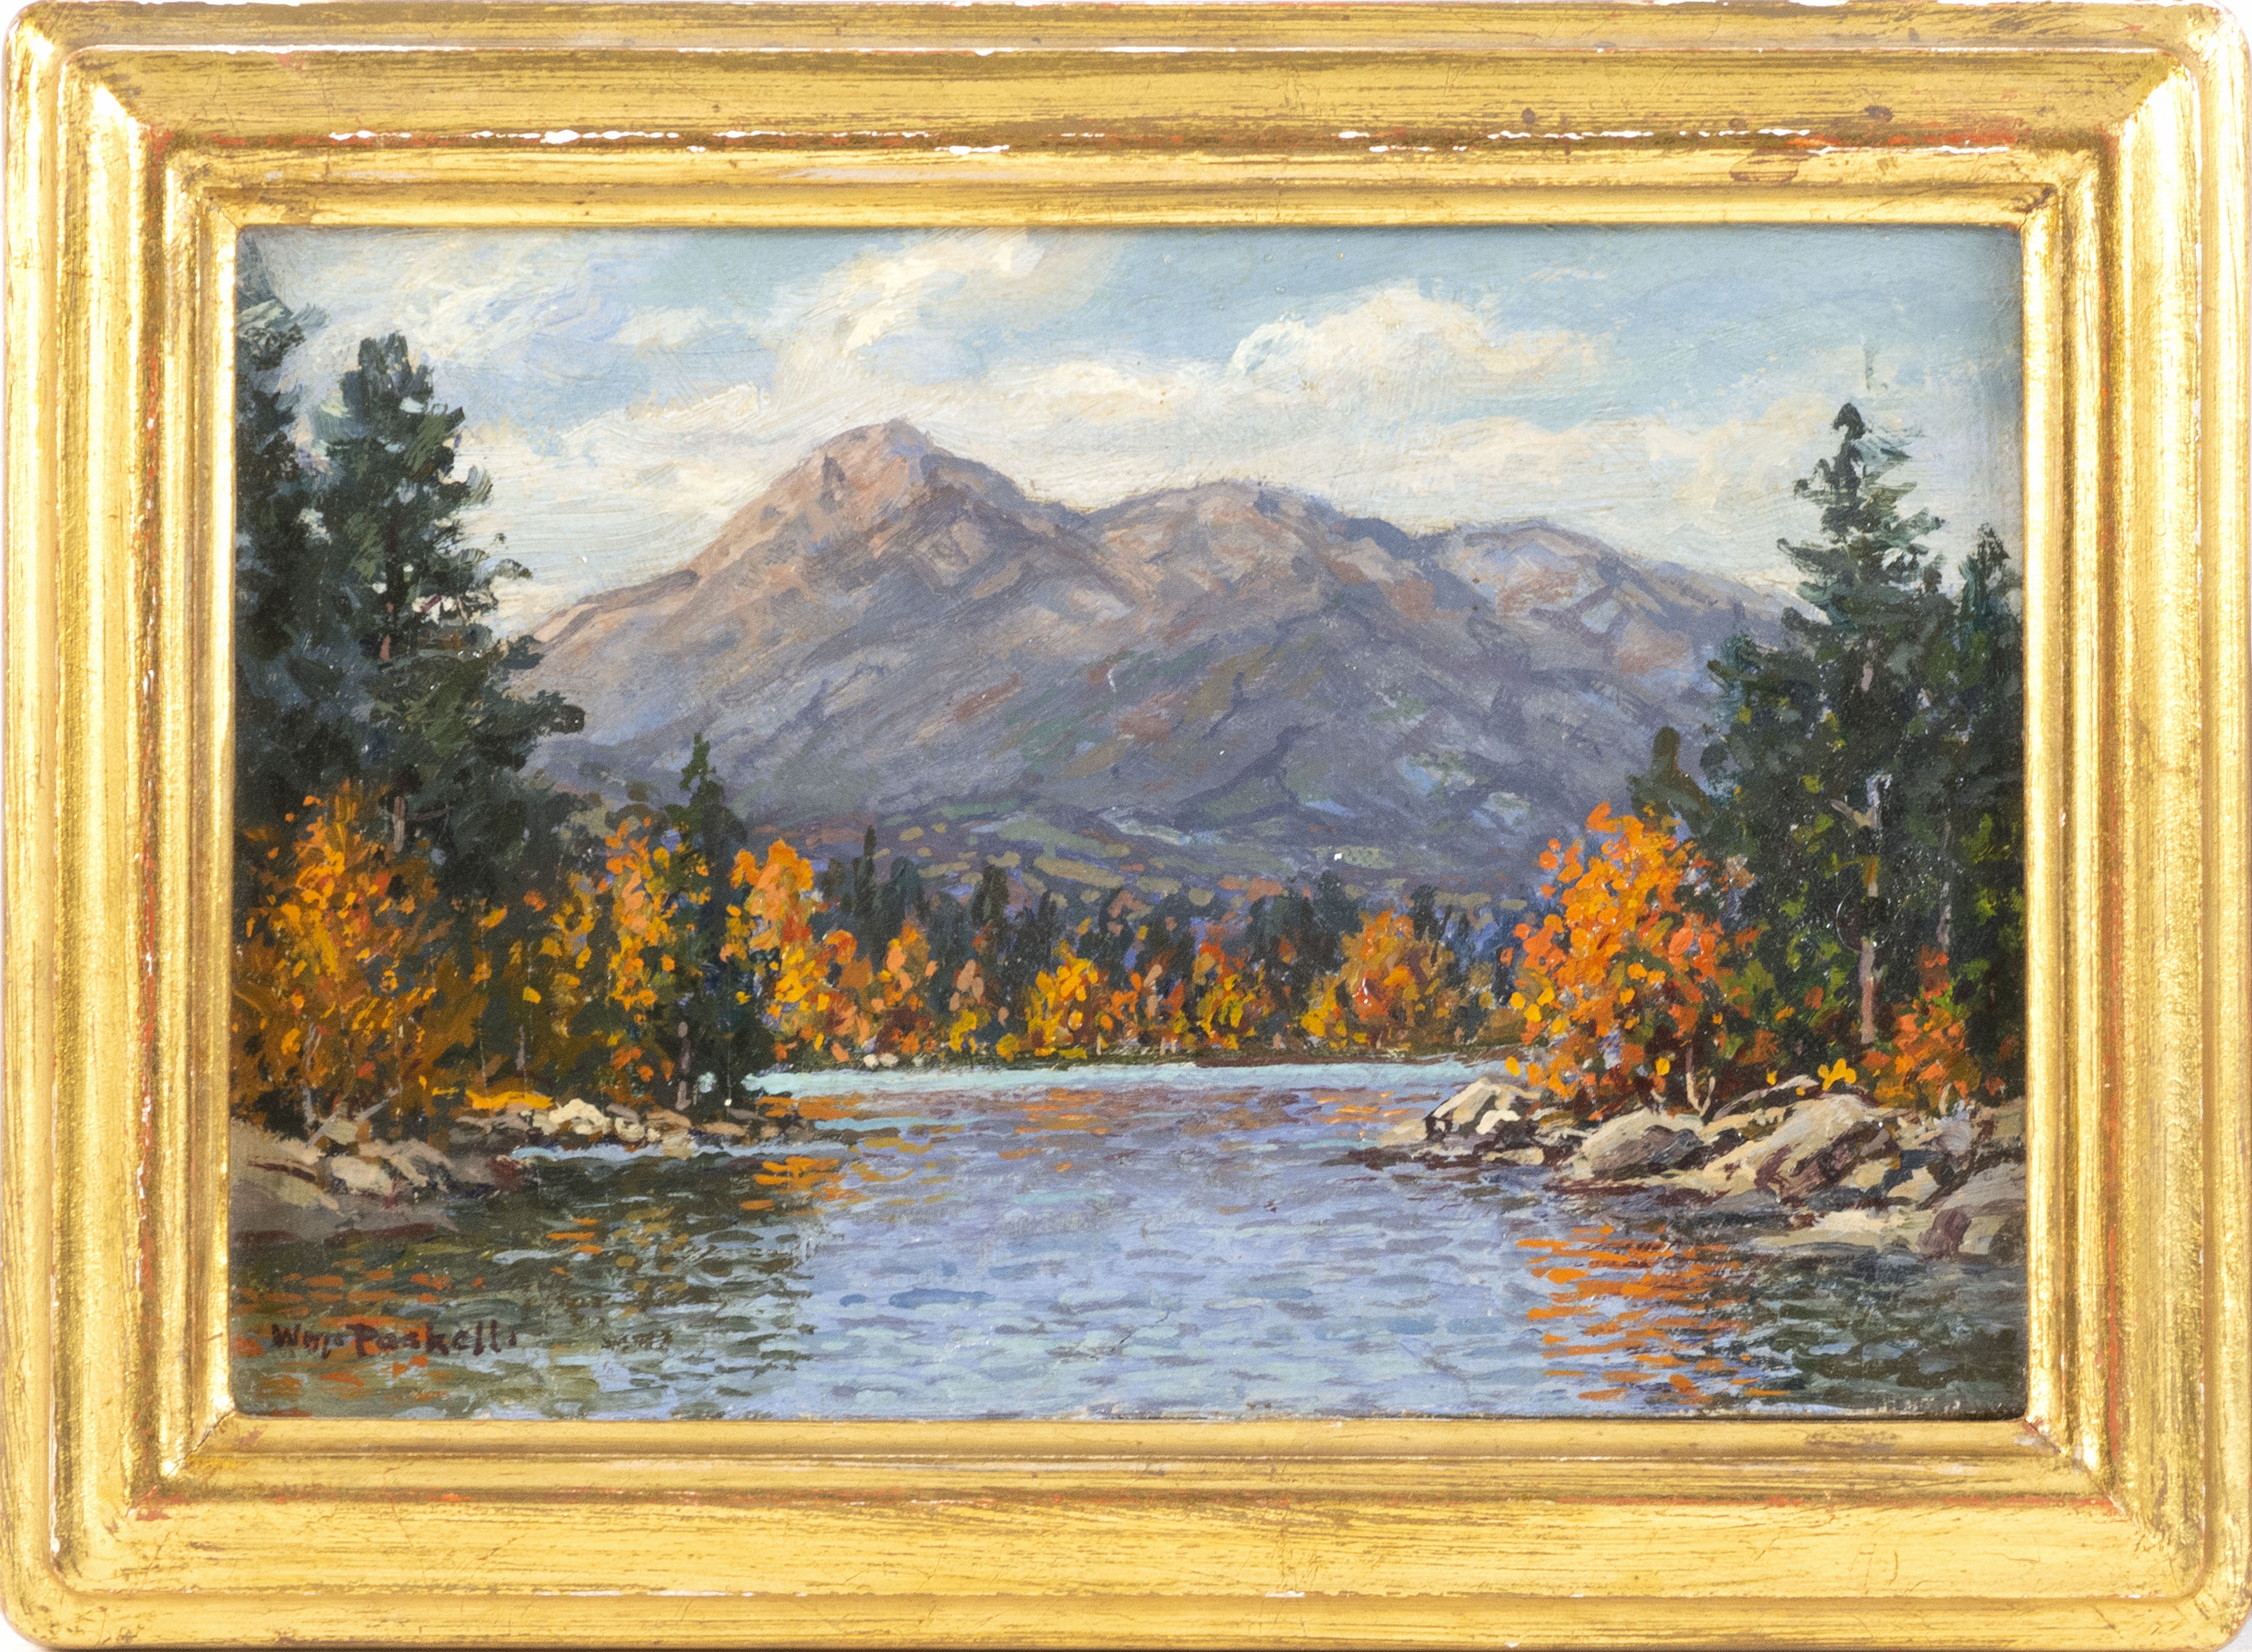 William Frederick Paskell | Mountain view, likely New Hampshire | MutualArt